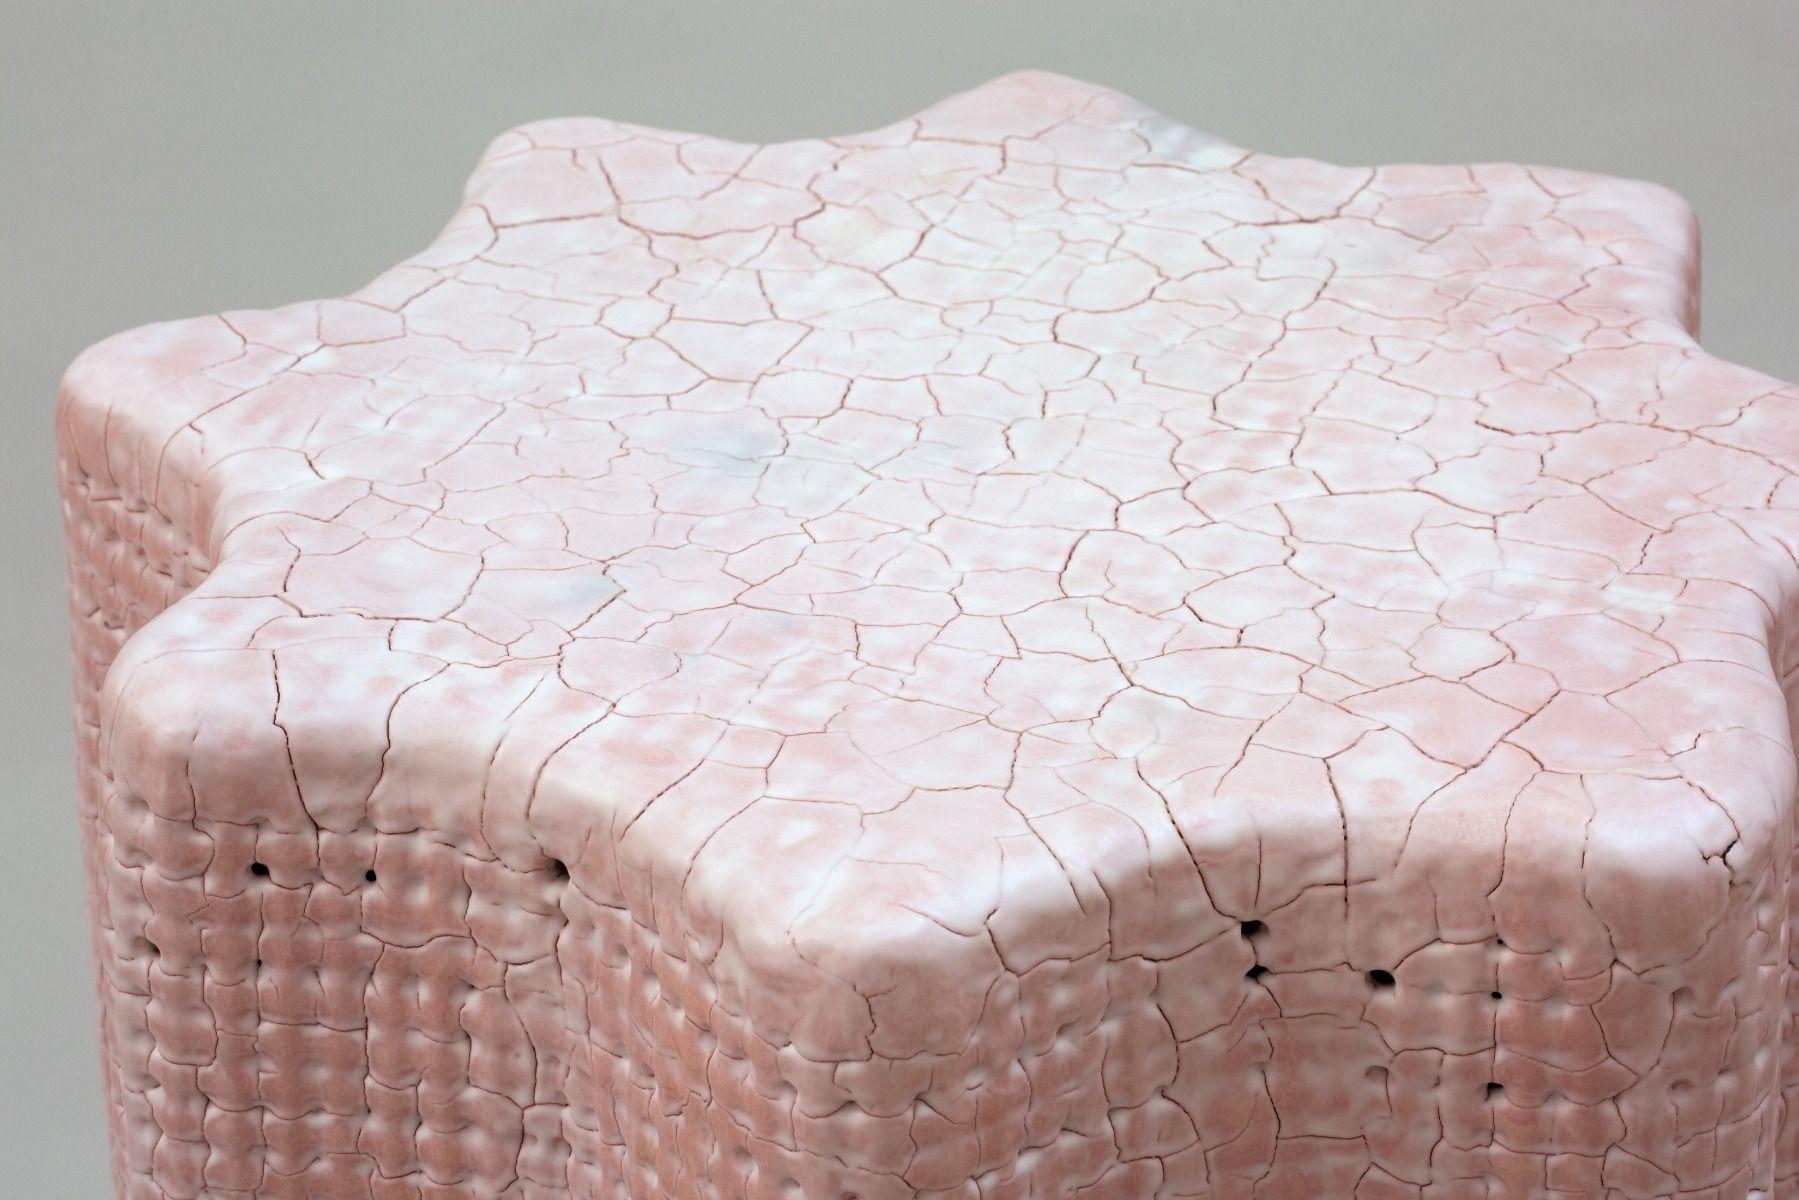 Scalloped side table by Scott Daniel Design.

MATERIALS
Pink Clay, White Glaze, Metal

DIMENSIONS
21” W x 23” H Dimension variations occur naturally, +/- 1”
Custom dimensions available

PROCESS
Inspired by the concept of Alchemy –